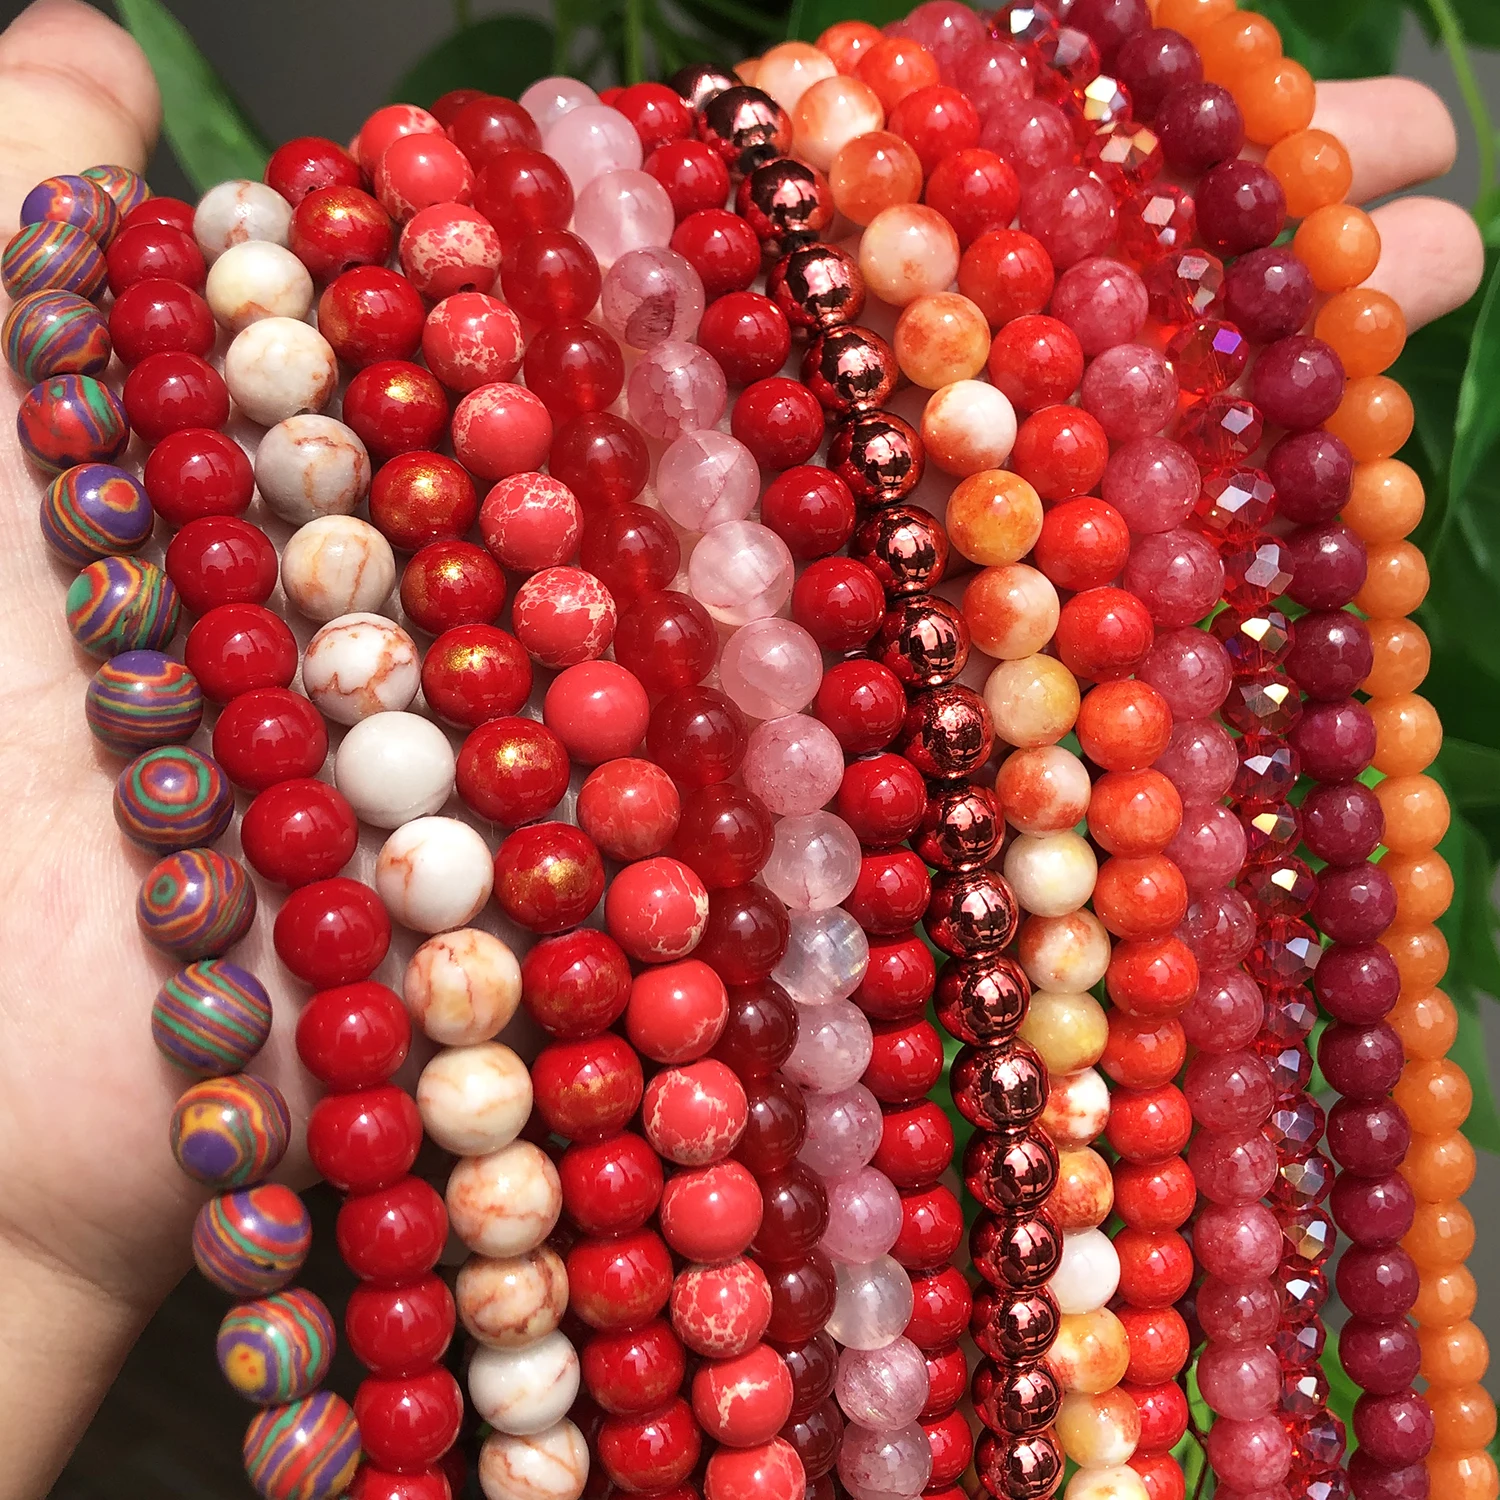 Red Coral Jades Agates Crystal Lava Mineral Beads Natural Loose Stone Beads For Jewelry Making Diy Bracelet 15'' 4 6 8 10 12mm